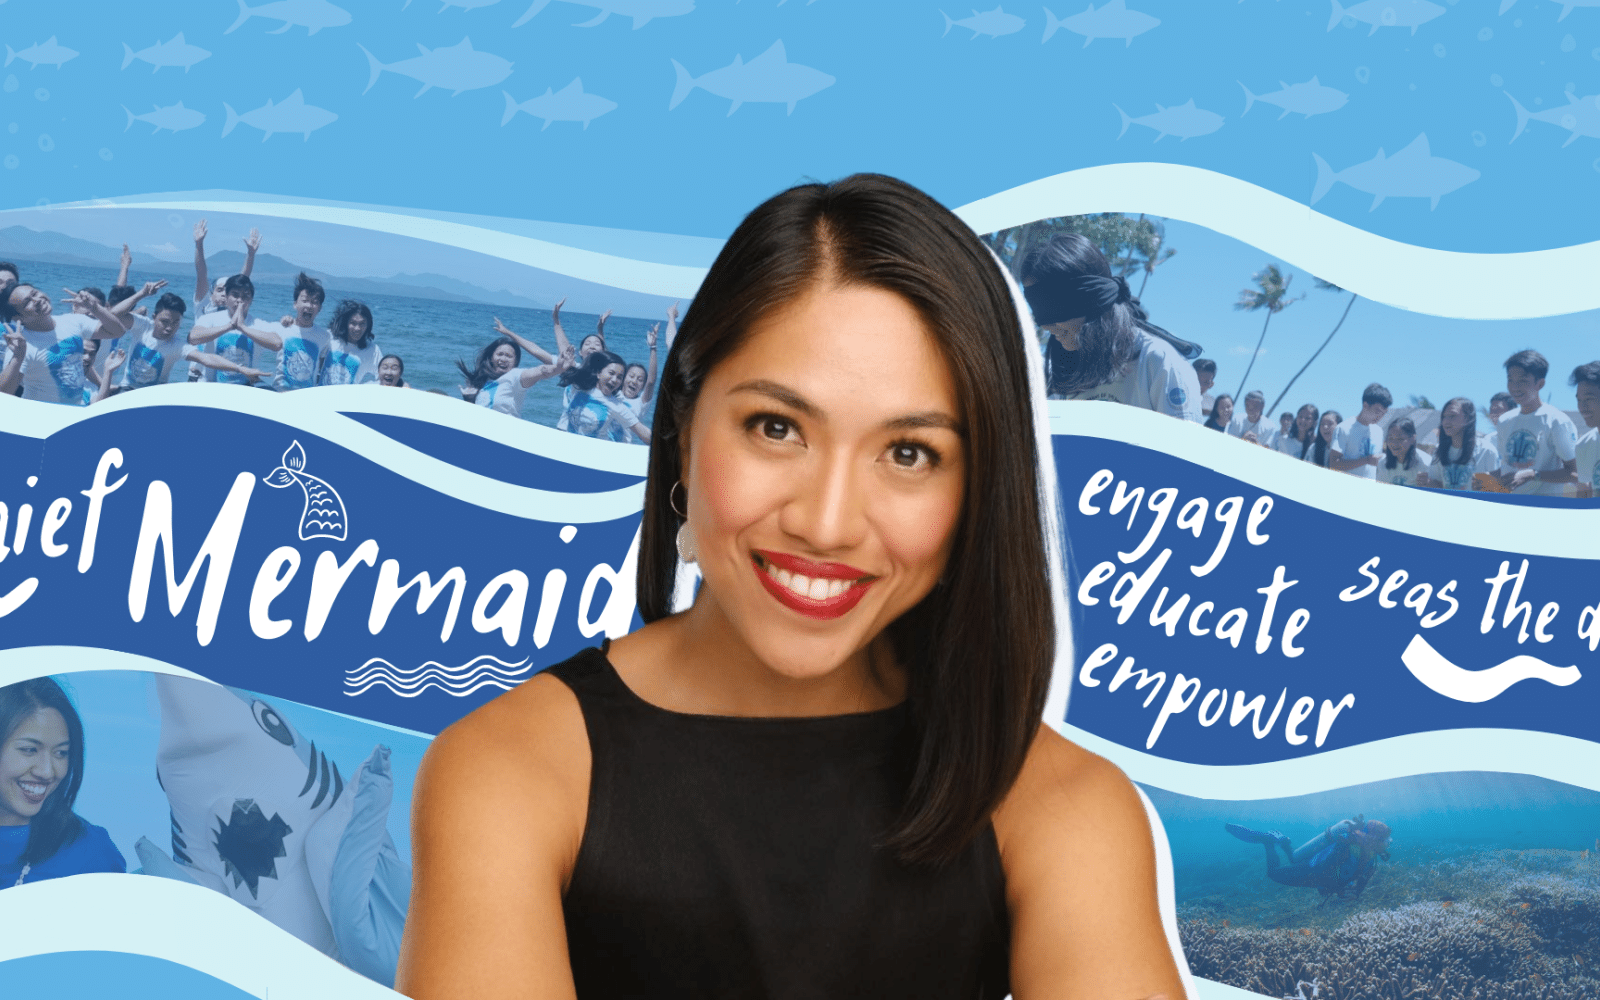 Ashoka Fellow Anna Oposa is at the center of a wave-inspired banner with photos of her marine conservation activities and the words "Chief Mermaid", "engage, educate, empower" and "seas the day" 